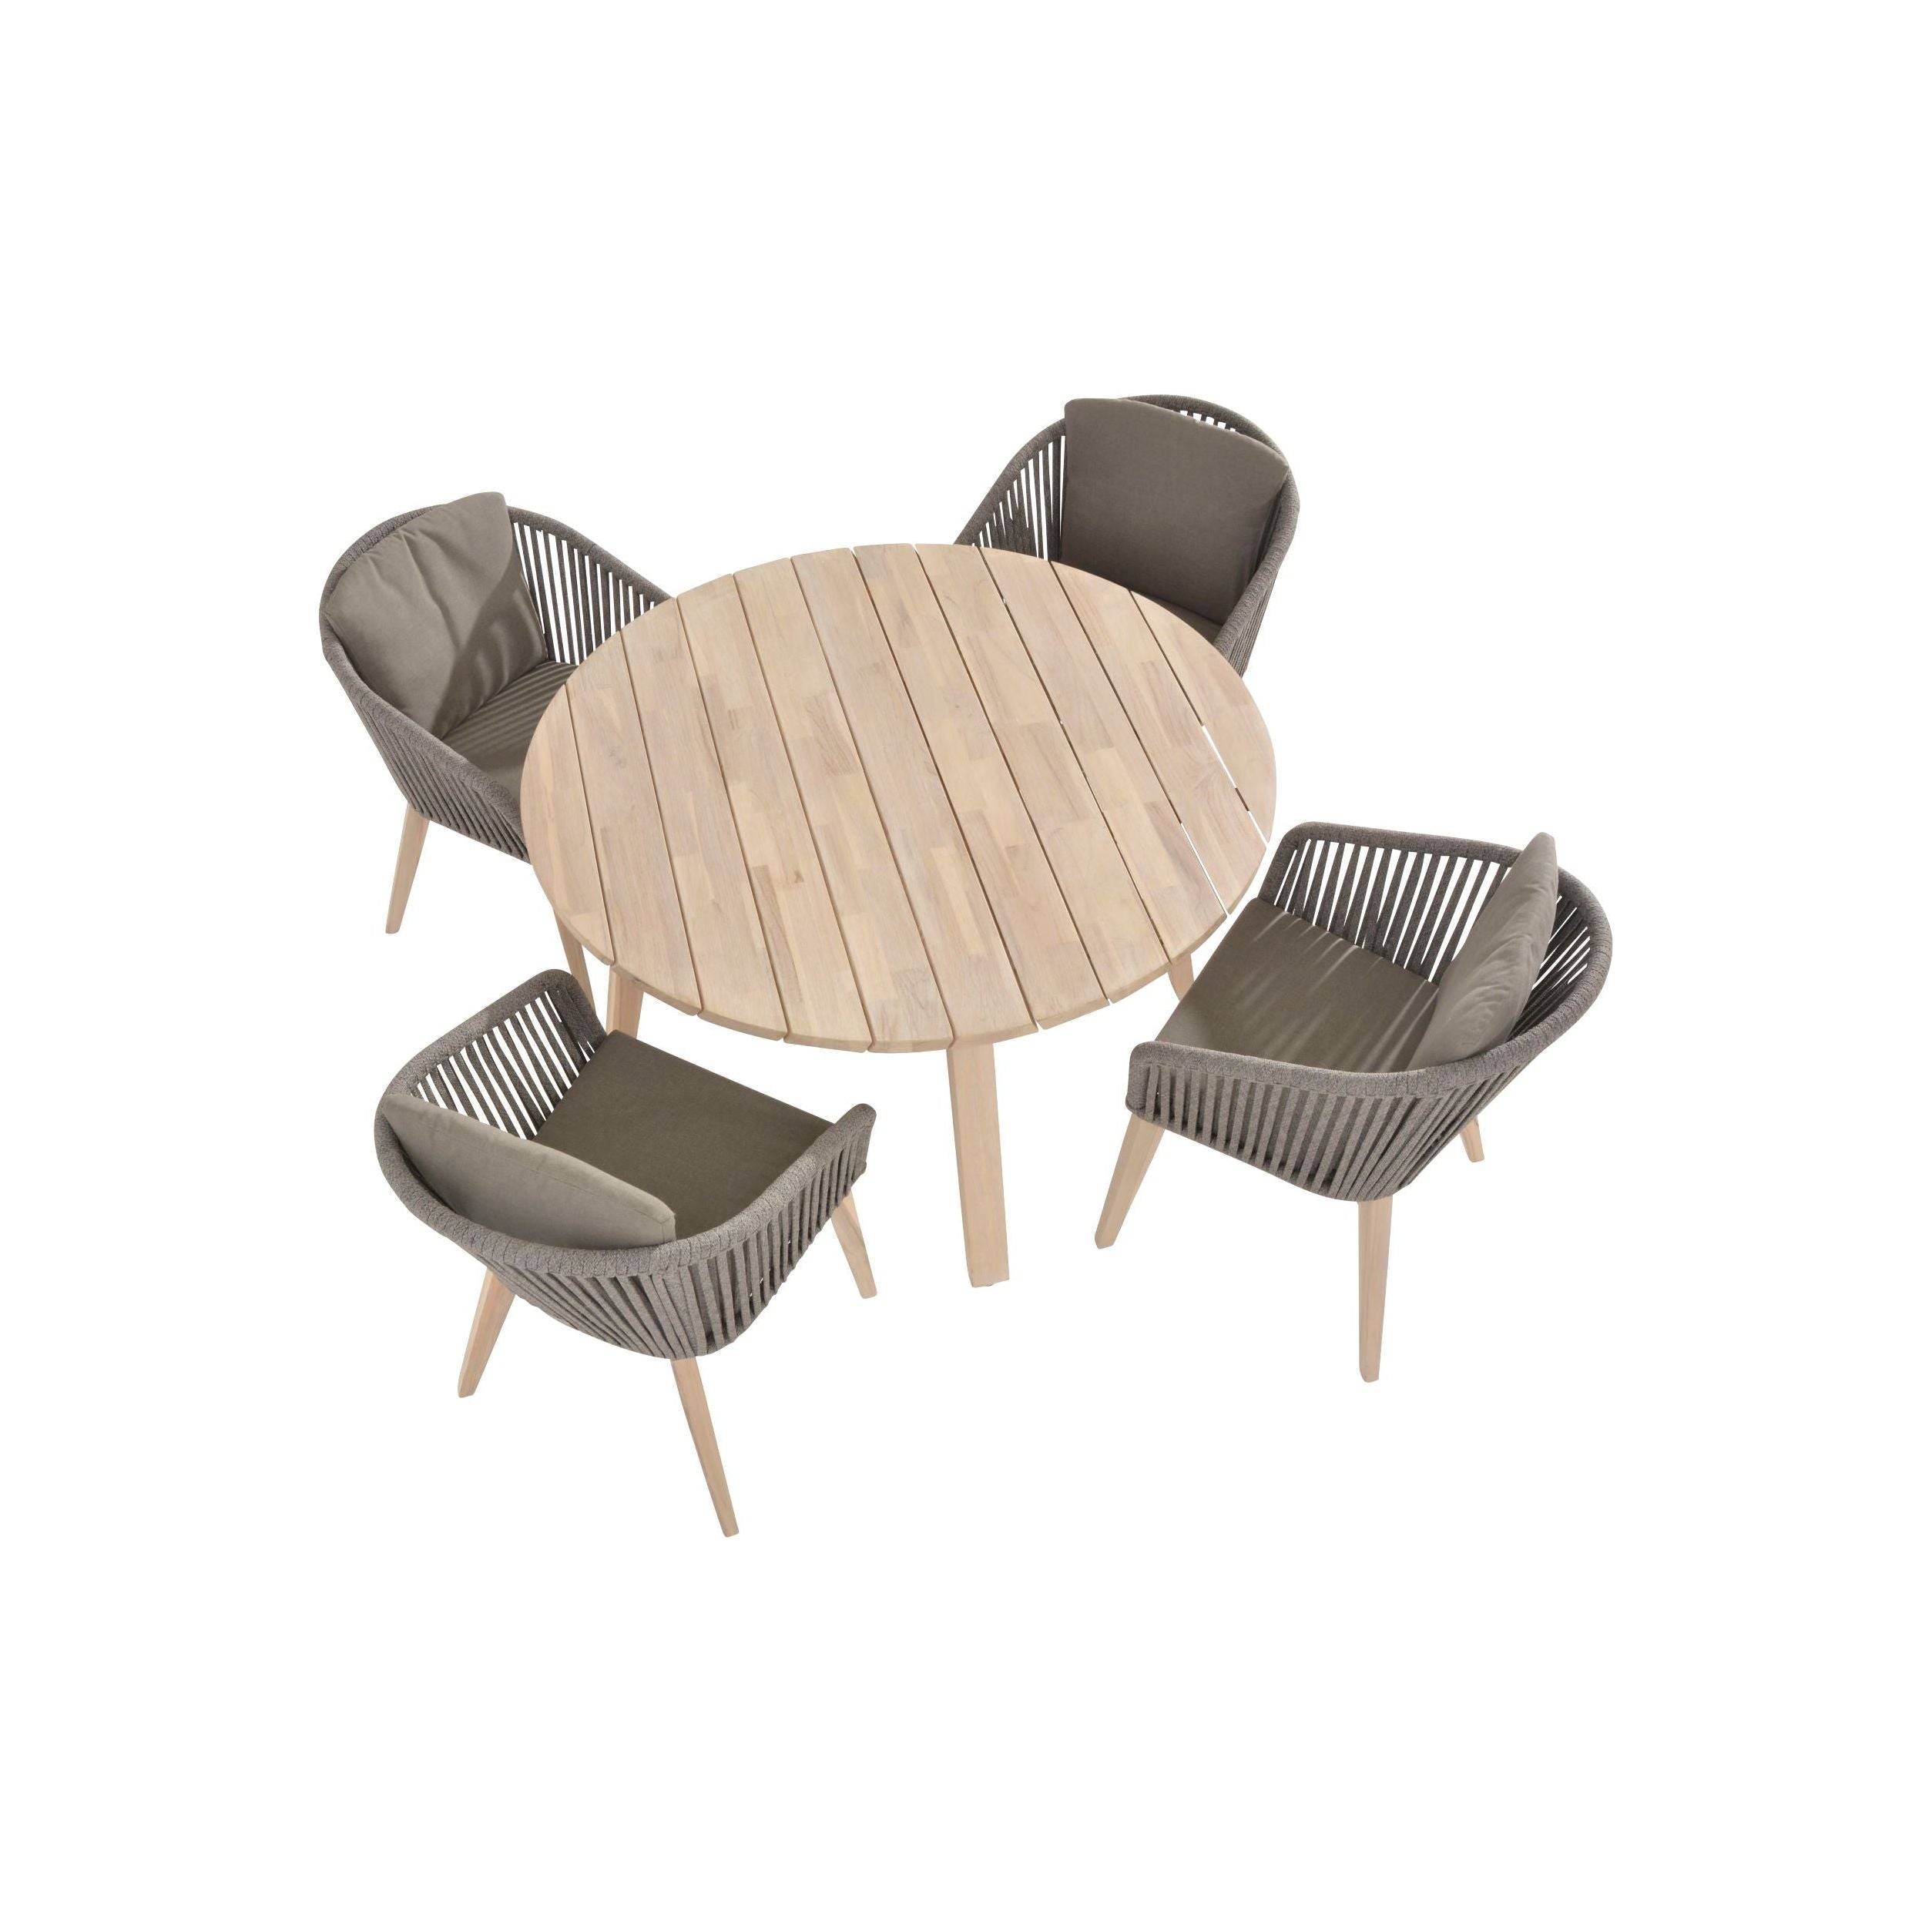 4 Seasons Outdoor Santander 4 Seat Dining with Derby Table